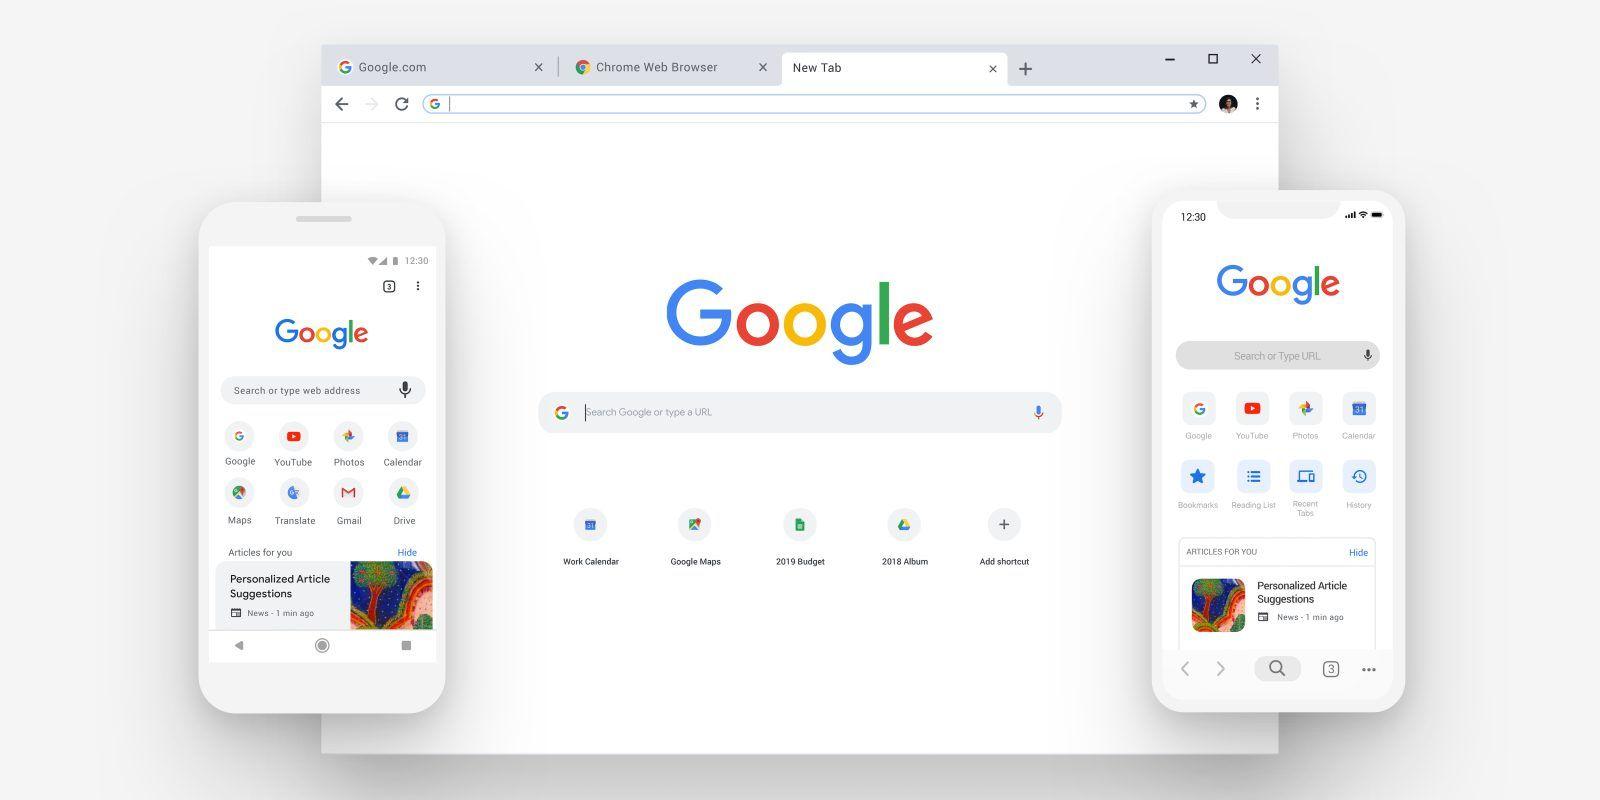 Chrome Mac Logo - Chrome 71 for Mac, Windows, and Linux rolling out - 9to5Google